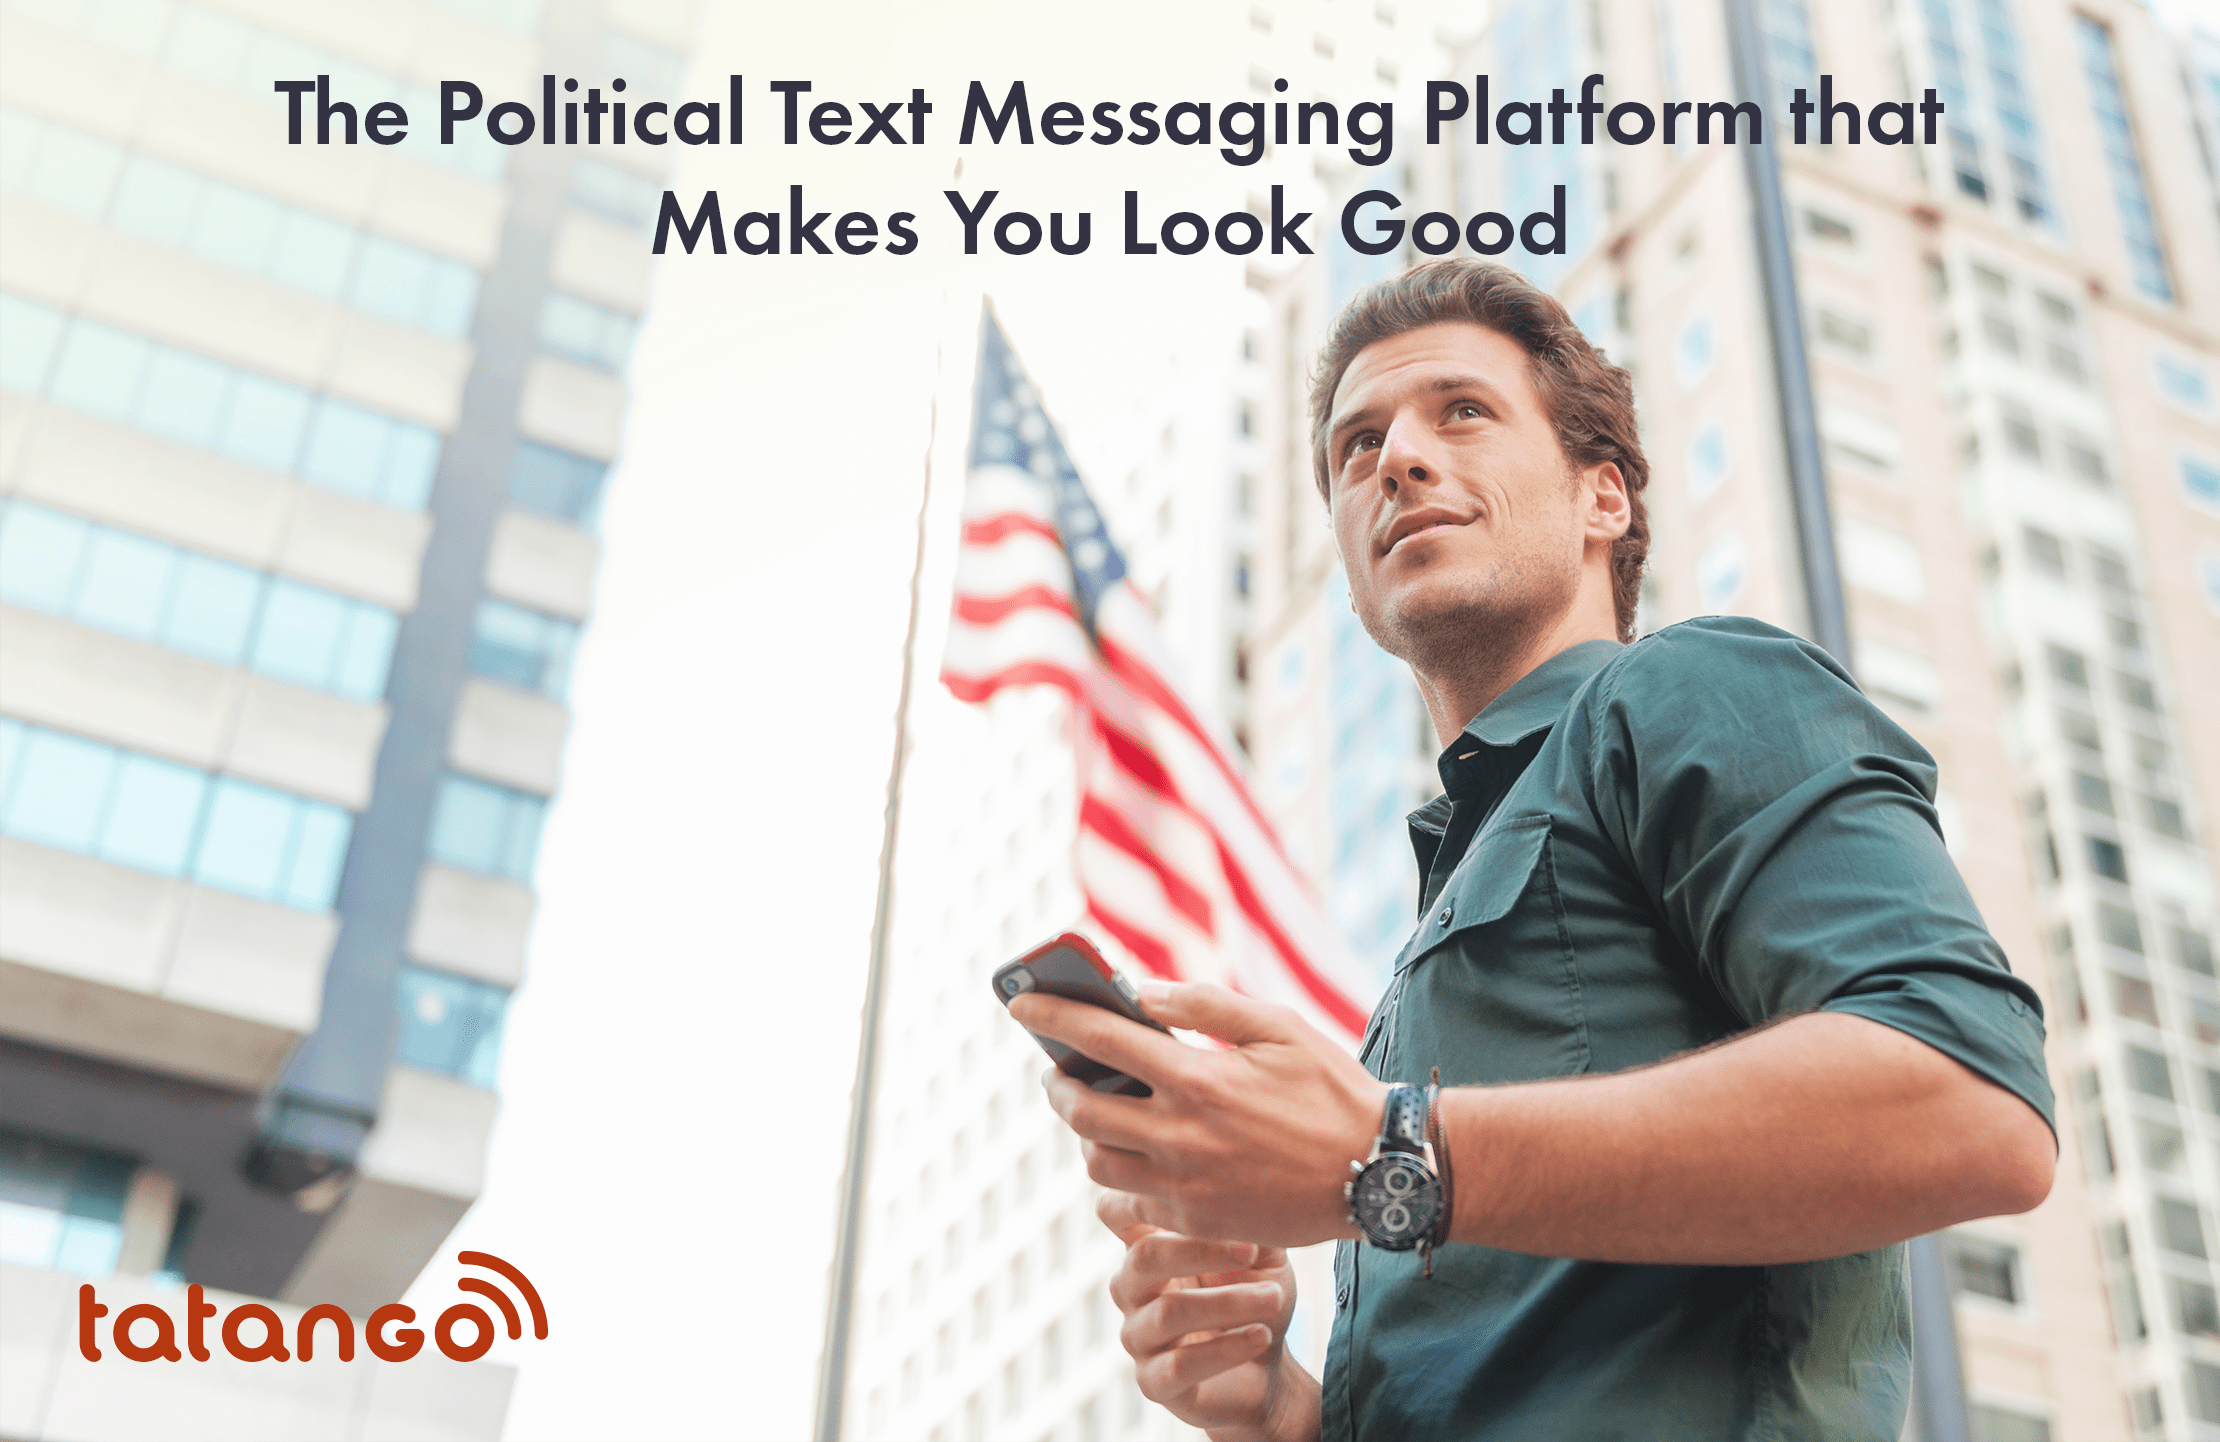 The Political Text Messaging Platform that Makes You Look Good